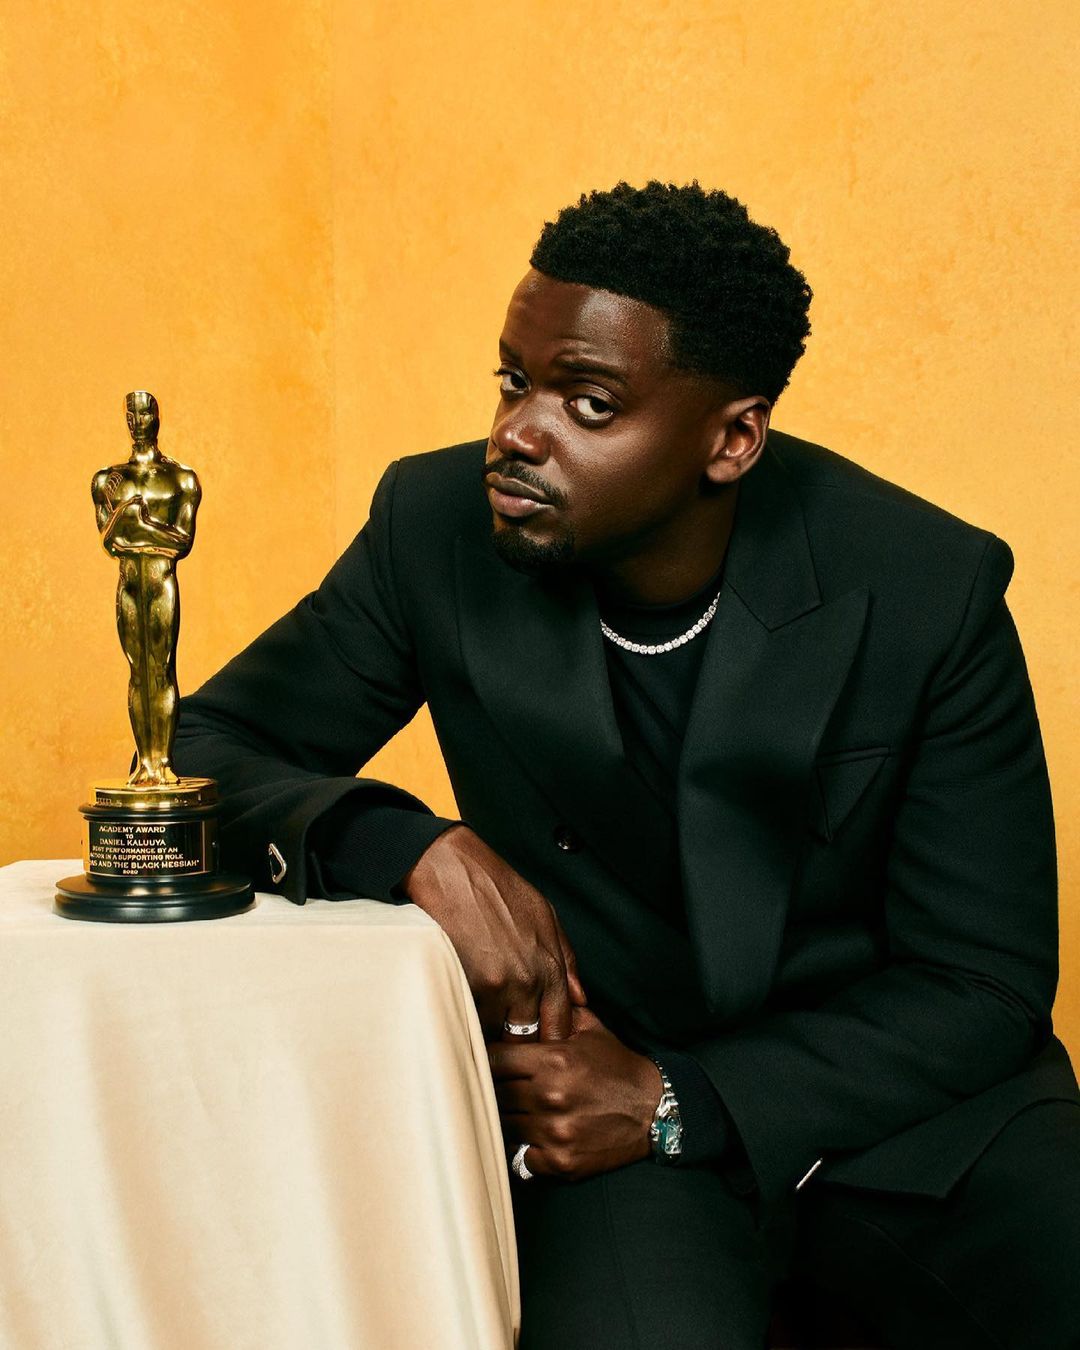 This Year's Official Oscar Portraits Were Captured By 23-Year-Old Black Photographer Quil Lemons